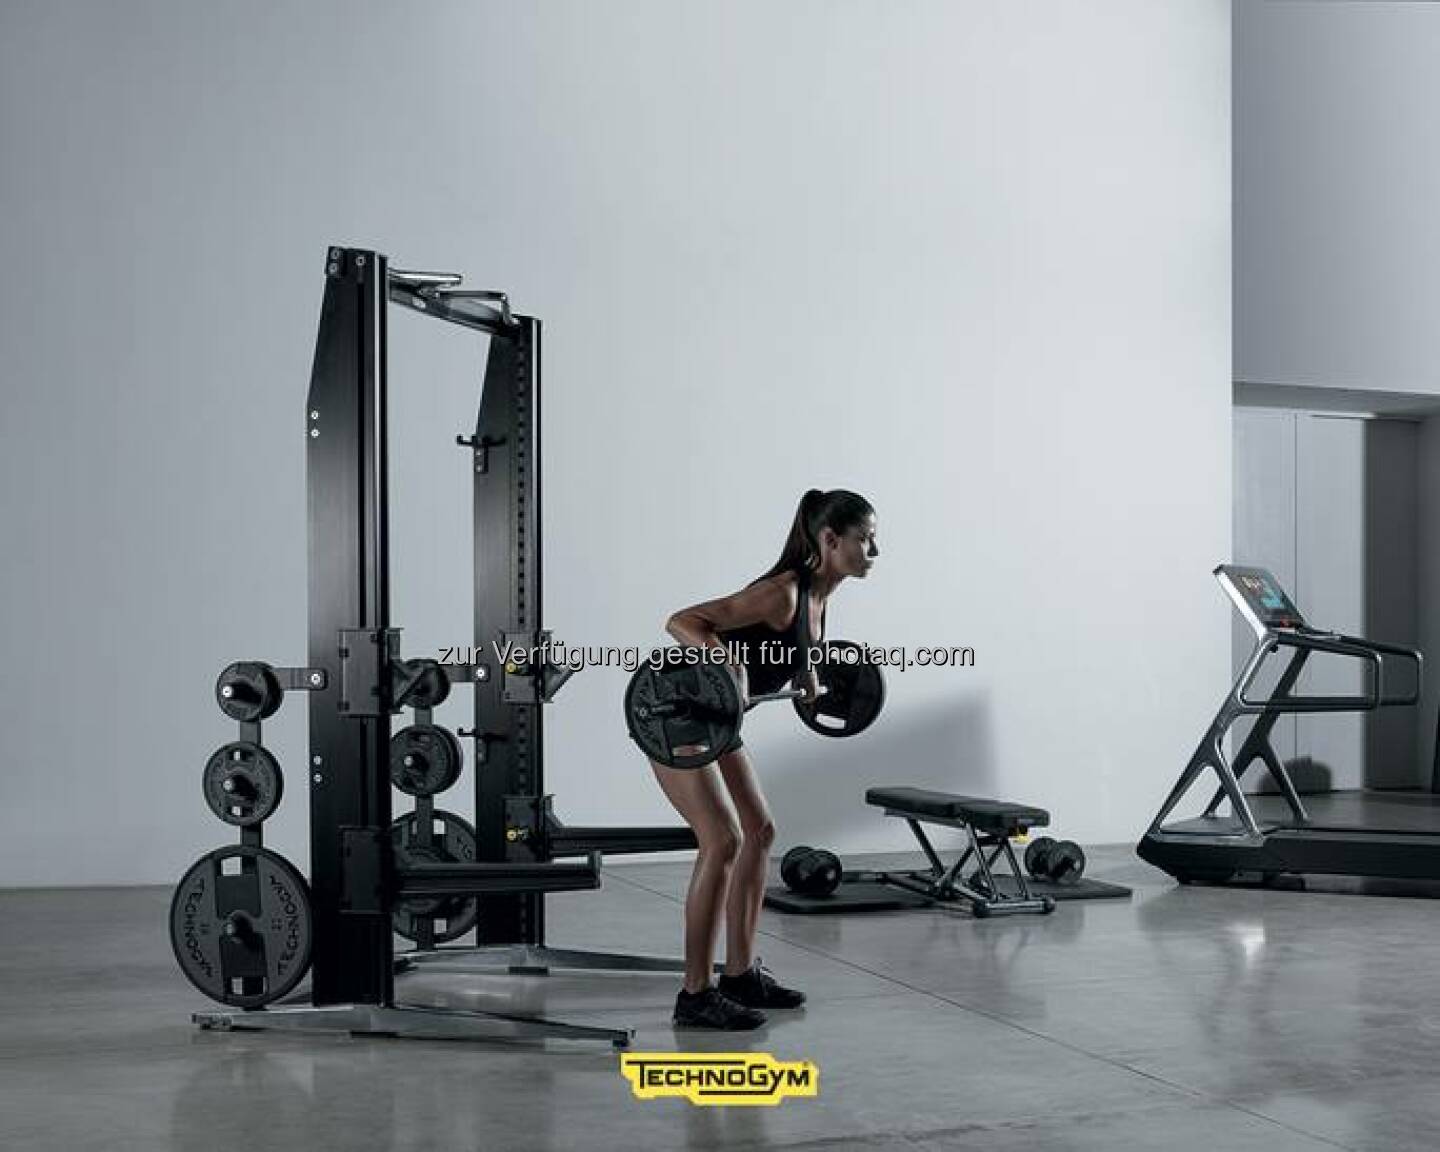 Challenge yourself with high-performance workout and professional training trends. #PowerPersonal is the core solution for your strength workout at home.
bit.ly/2cezRdF  Source: http://facebook.com/technogym